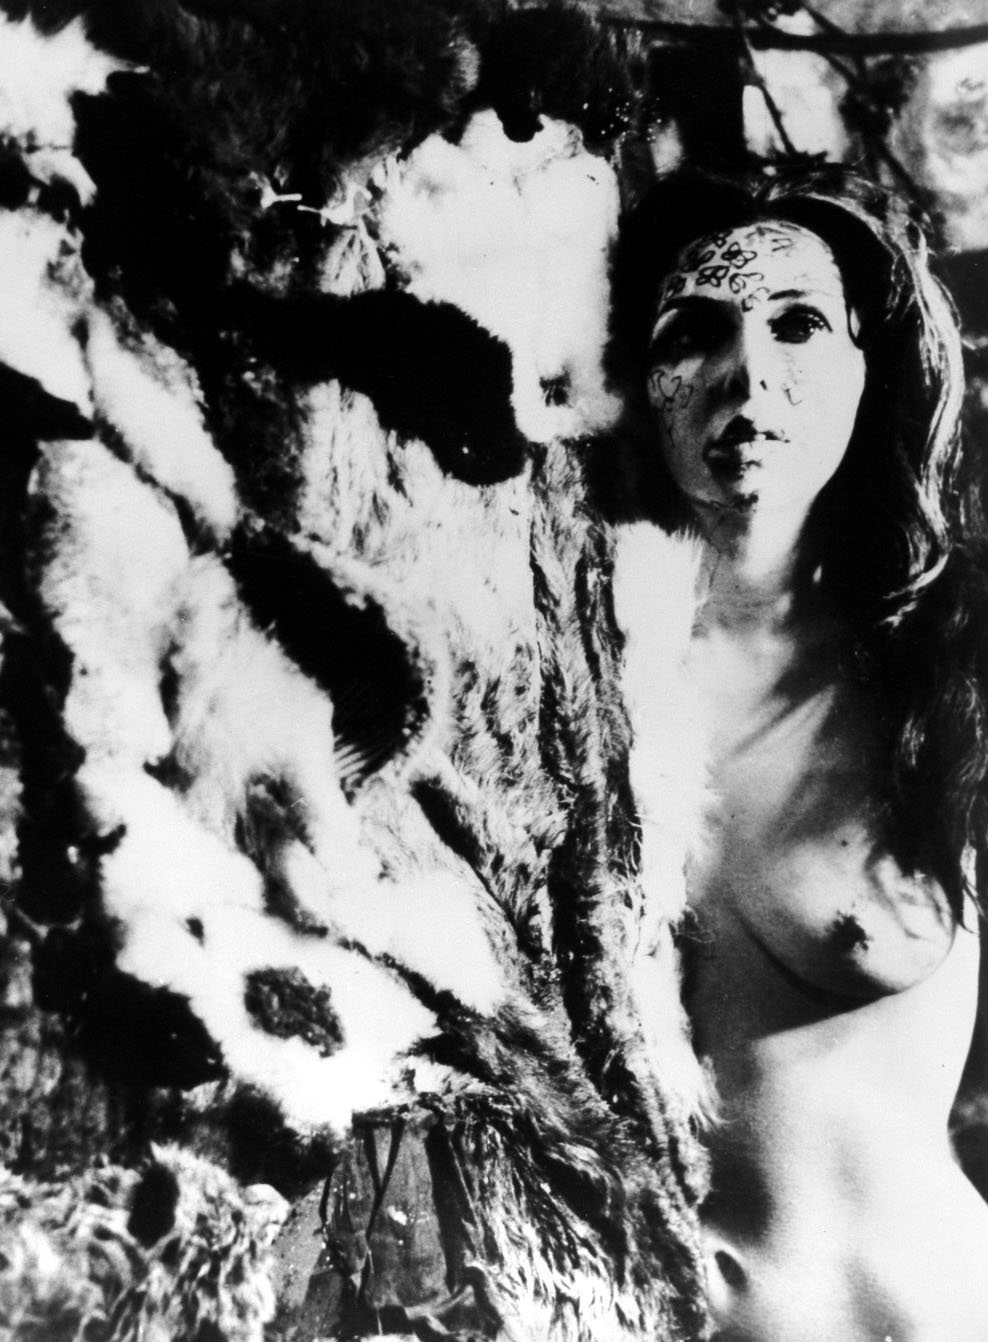 Black and white photo of the artist standing naked from the waist up, the left half of her body is obscured by materials and there is paint on her face.